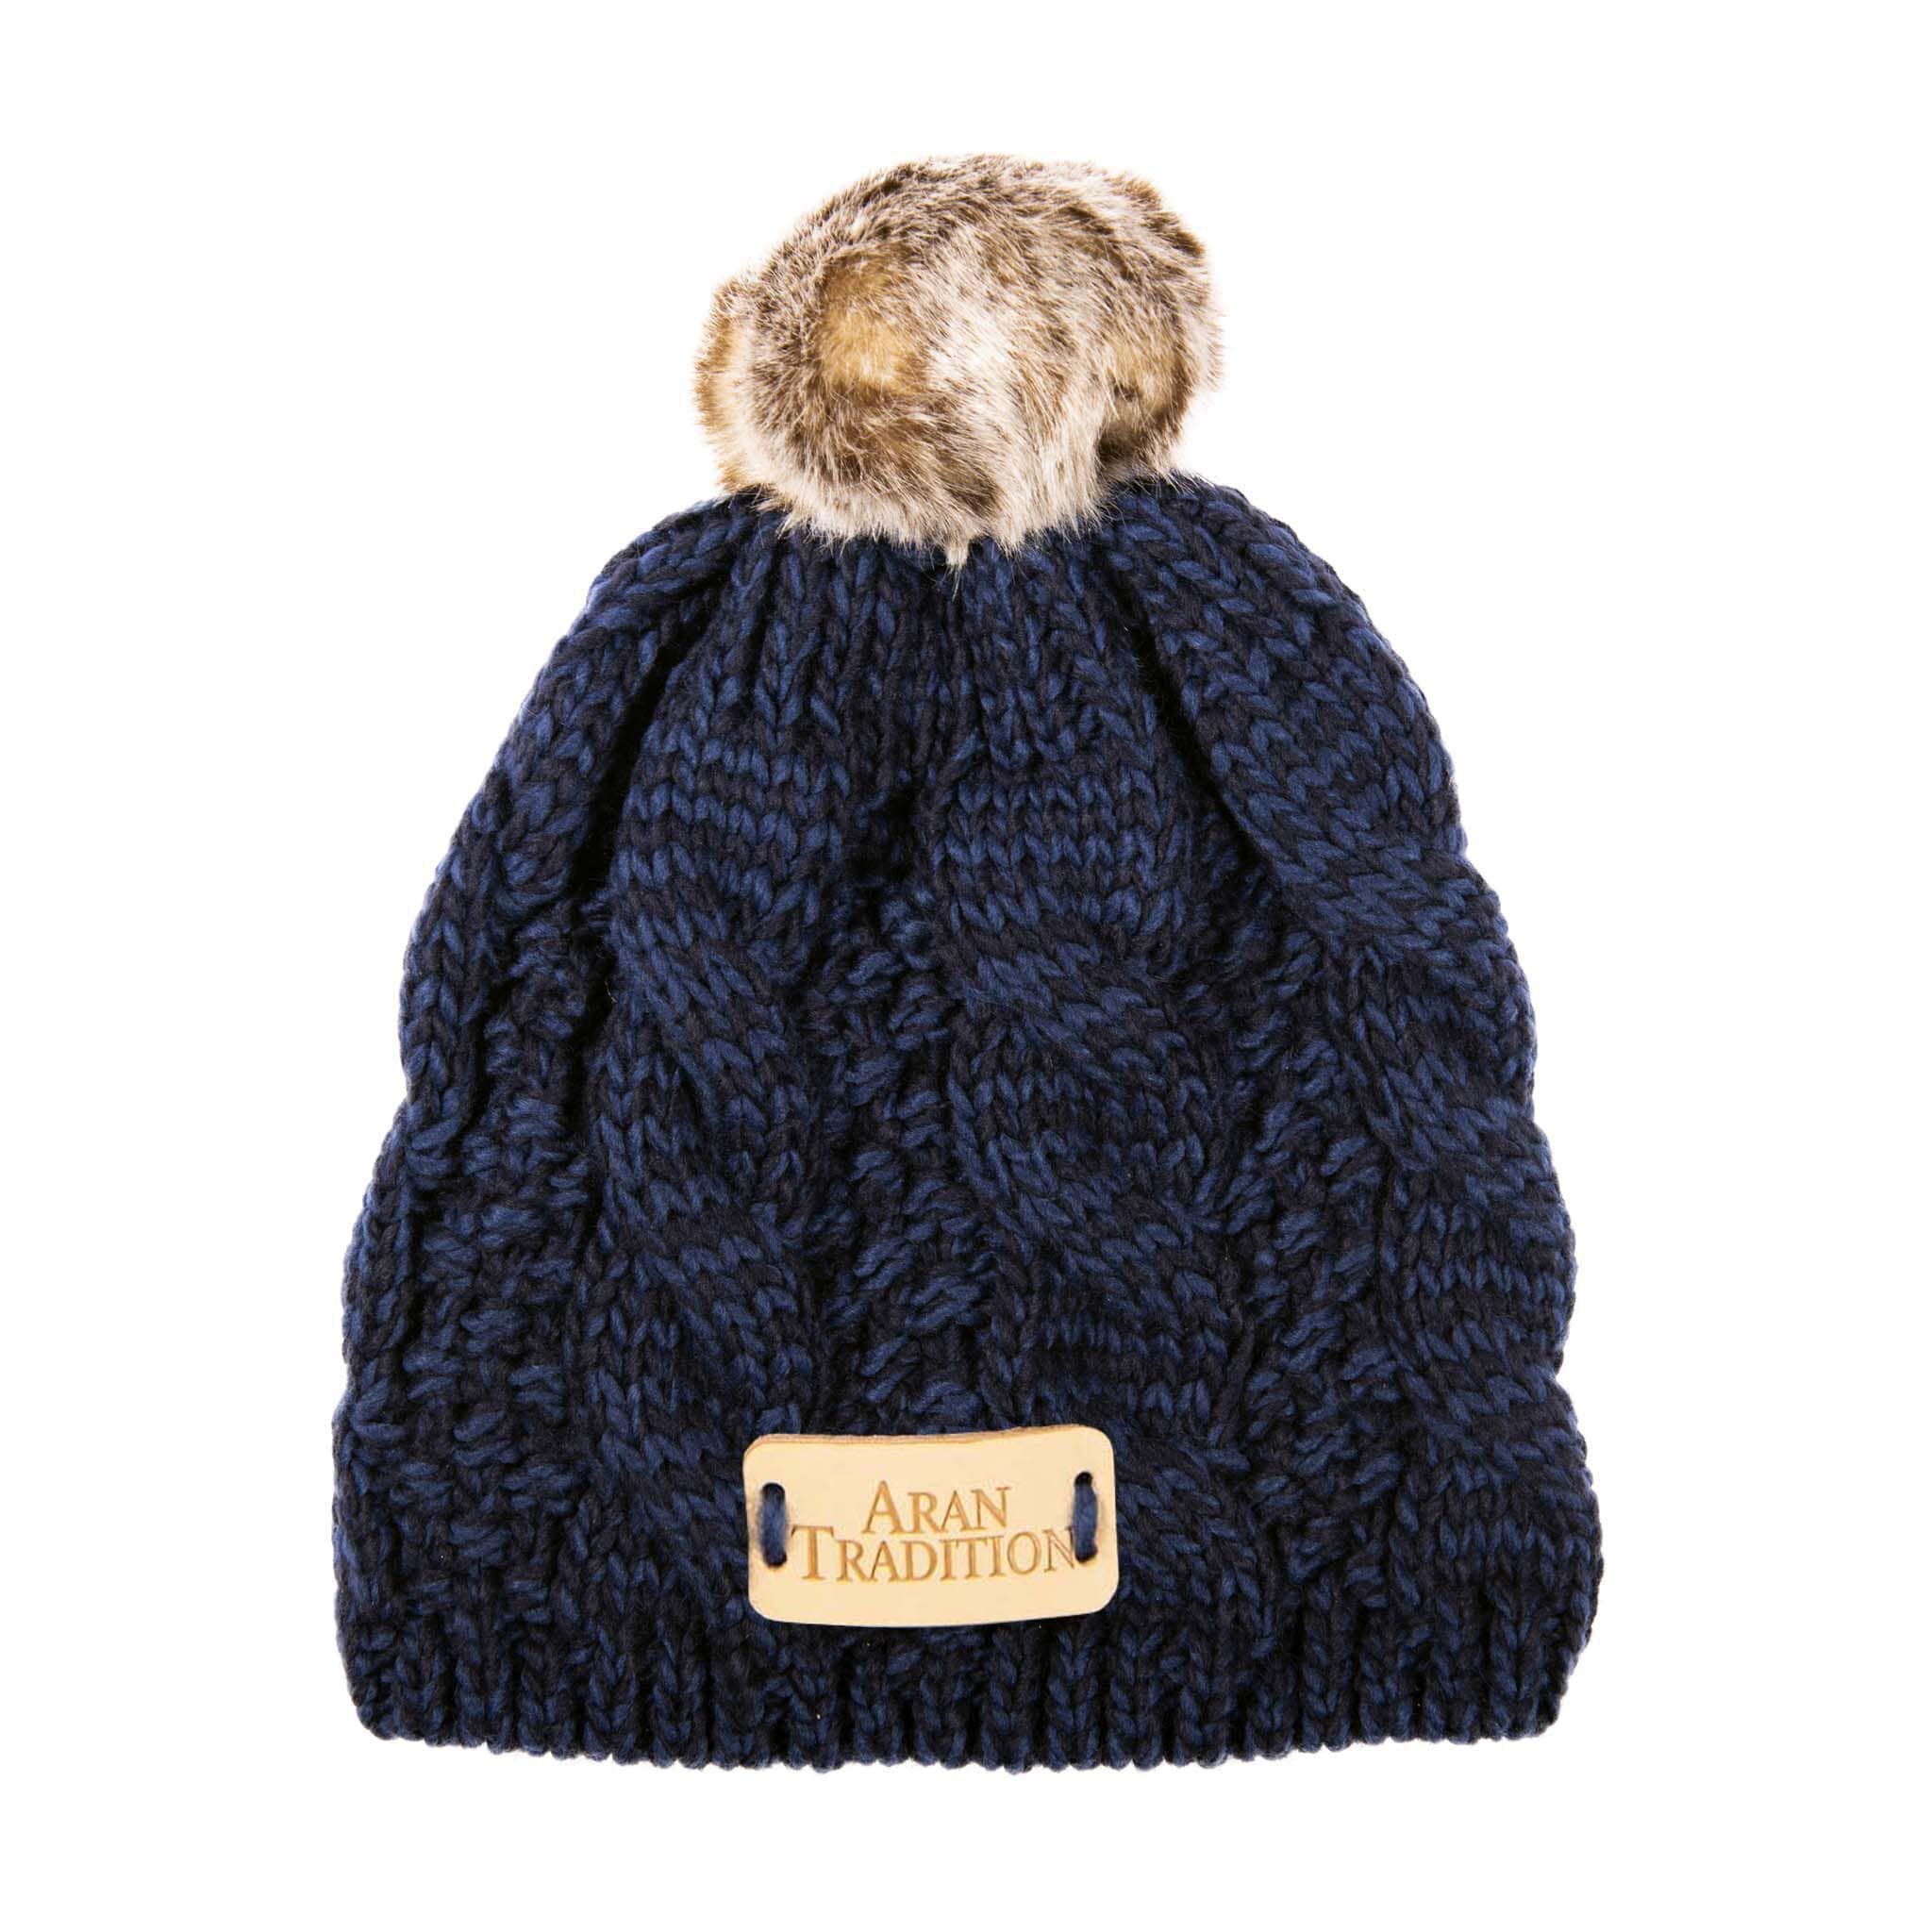 Buy Kids Knit Style Aran Traditions Cable Knit Tammy Bobble Hat, Navy ...